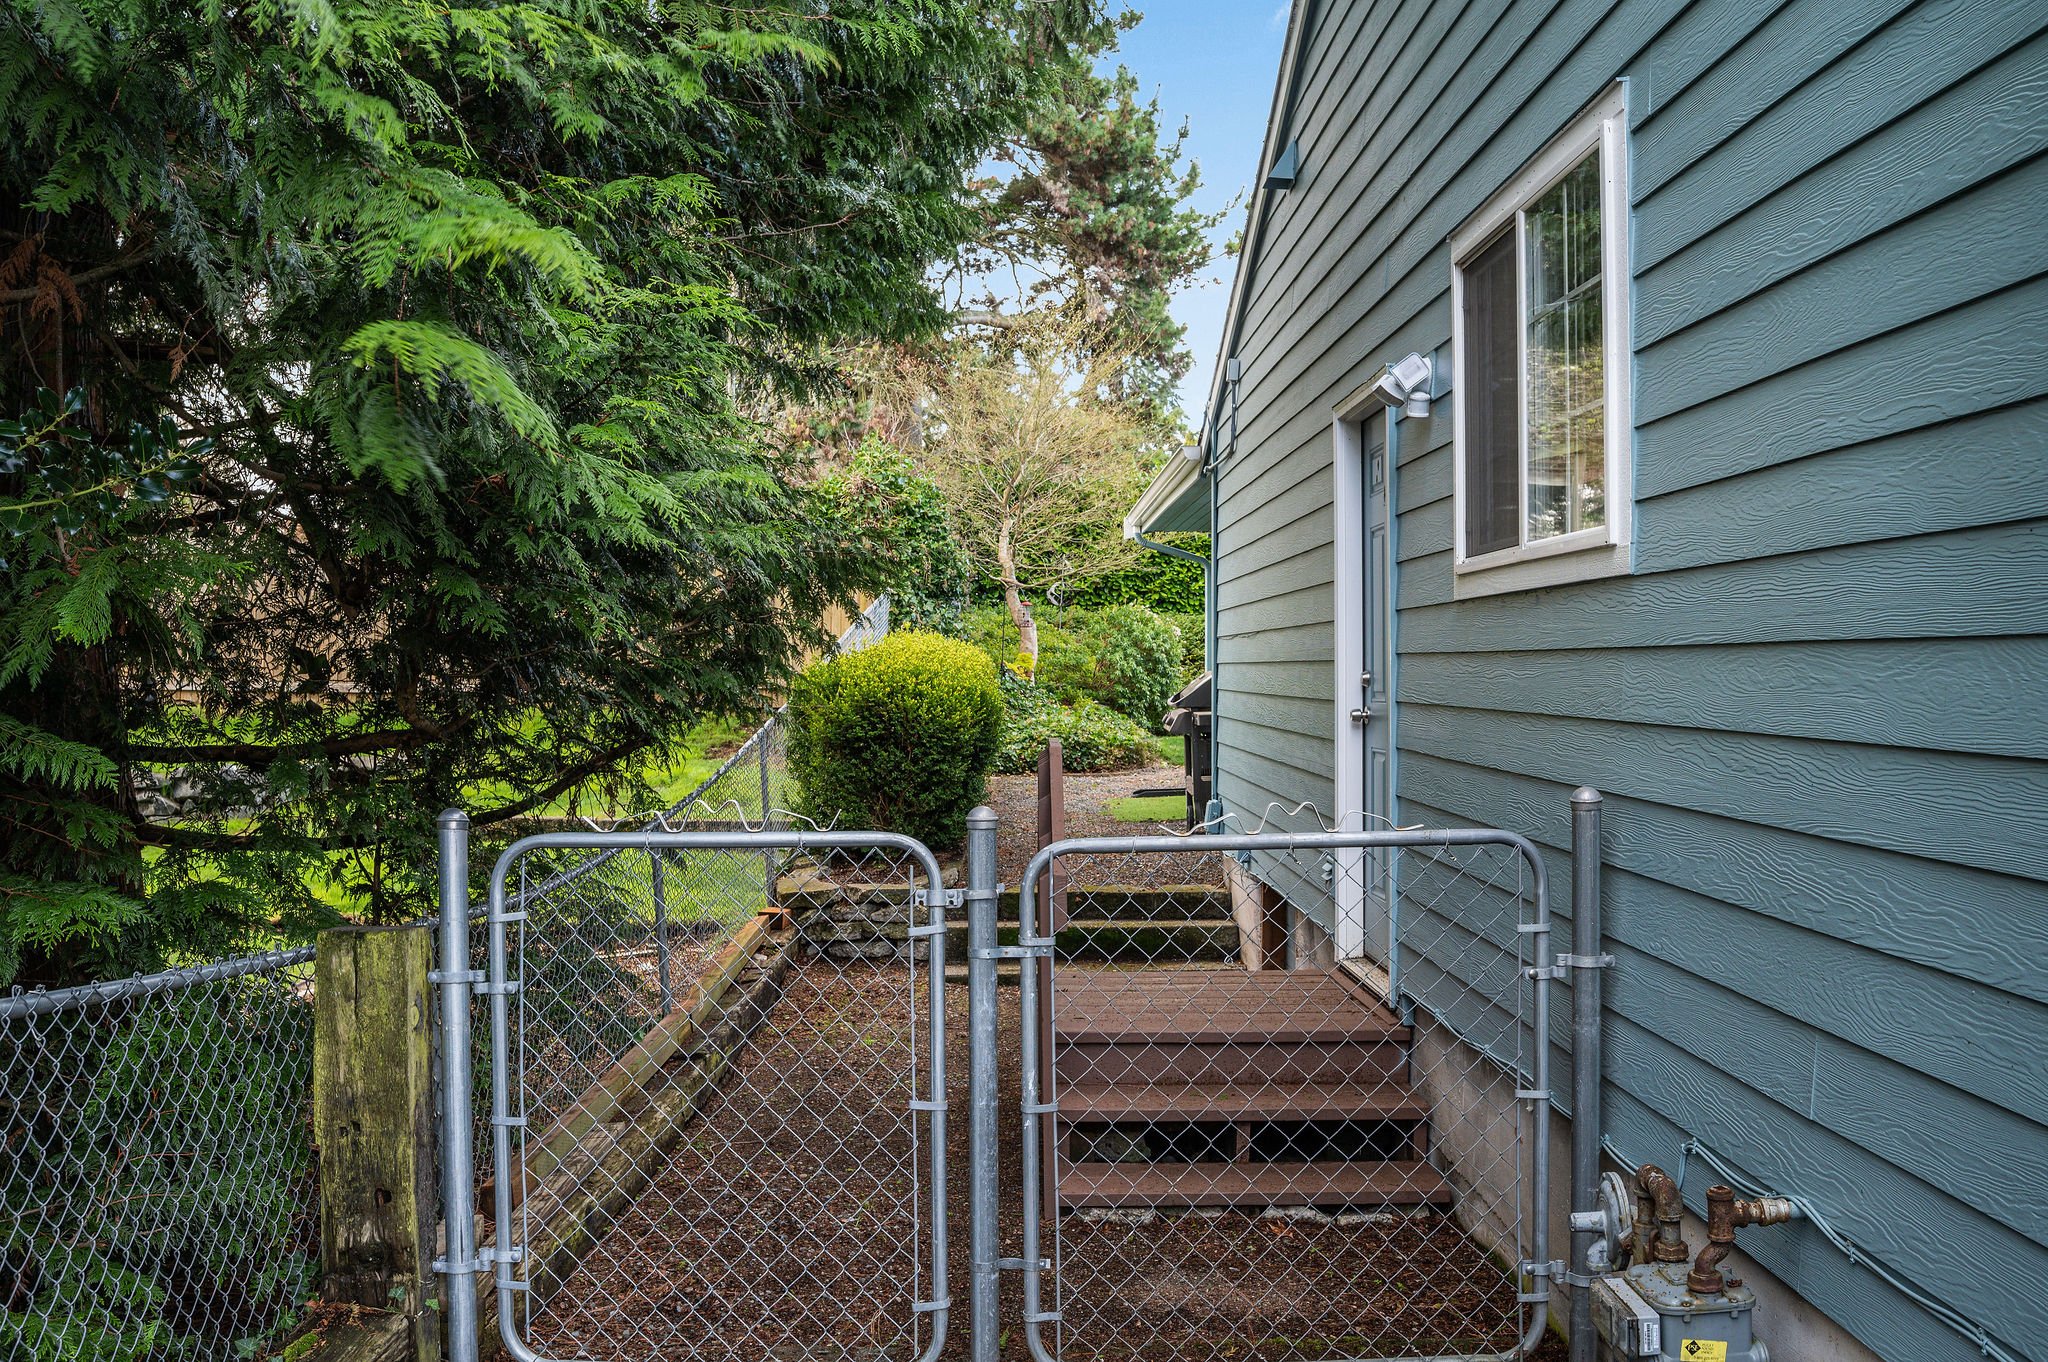  image description: view of walkway on the side of the house with gate 